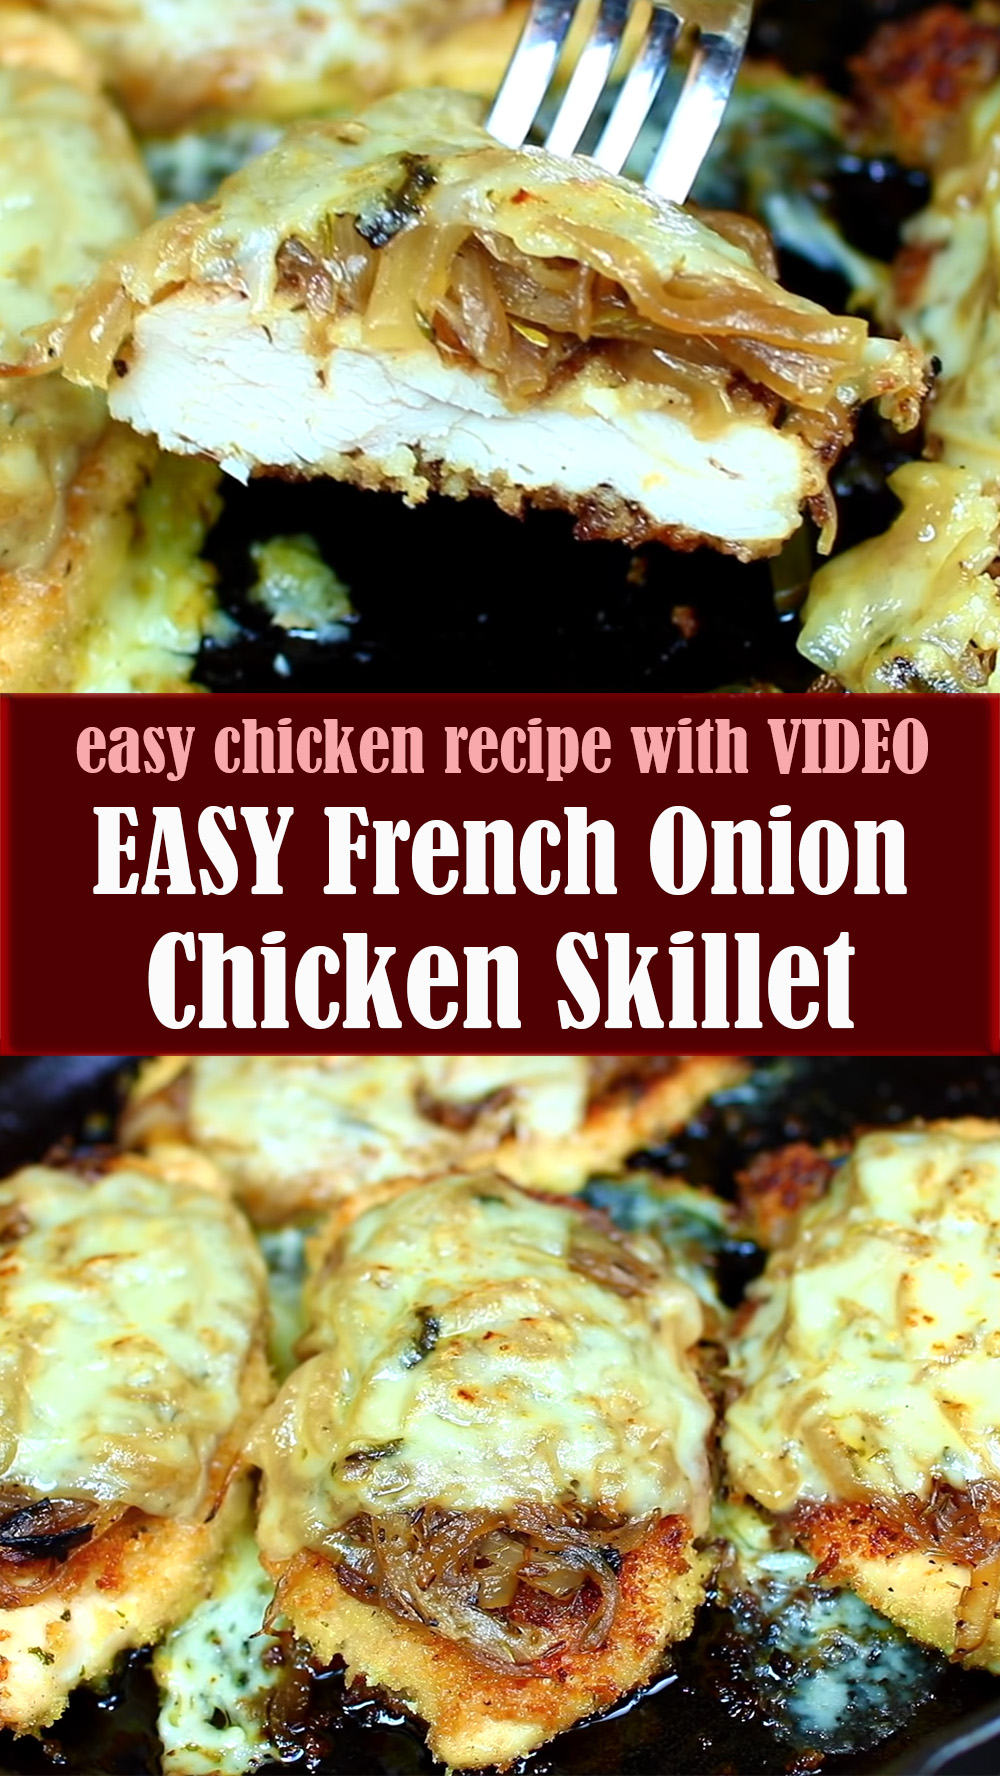 EASY French Onion Chicken and Cheese Skillet